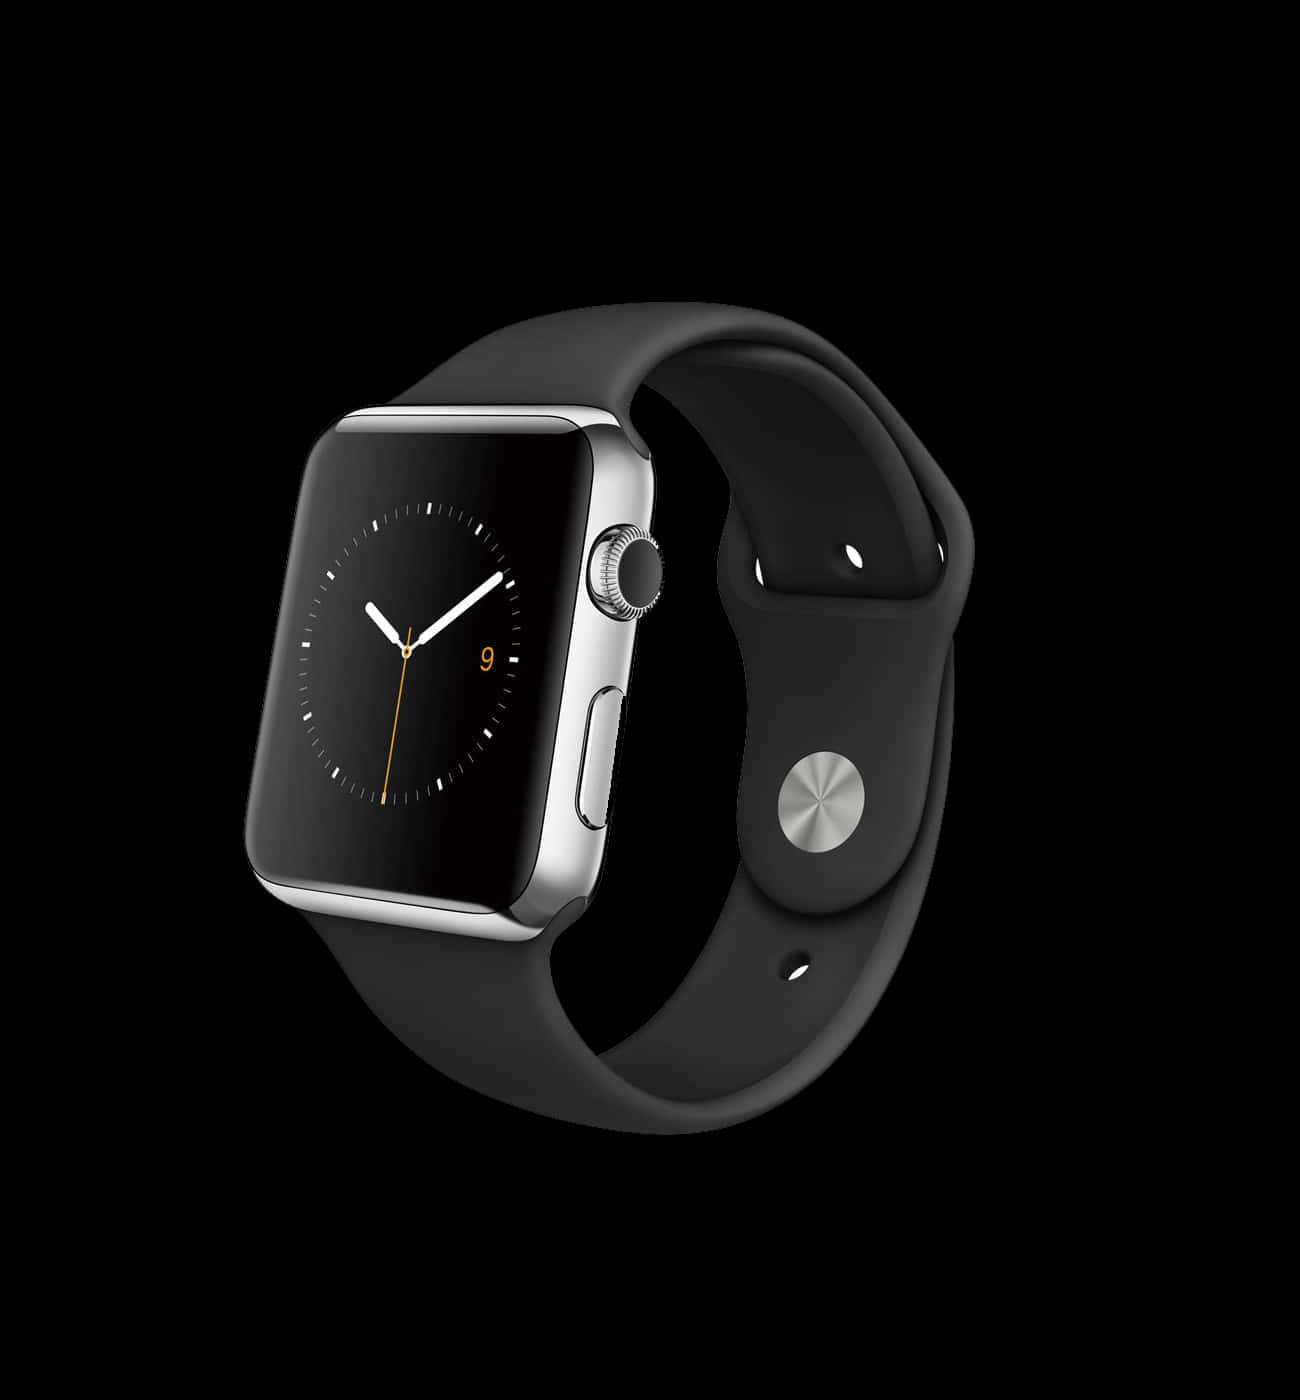 An Apple Watch Is Shown Against A Black Background